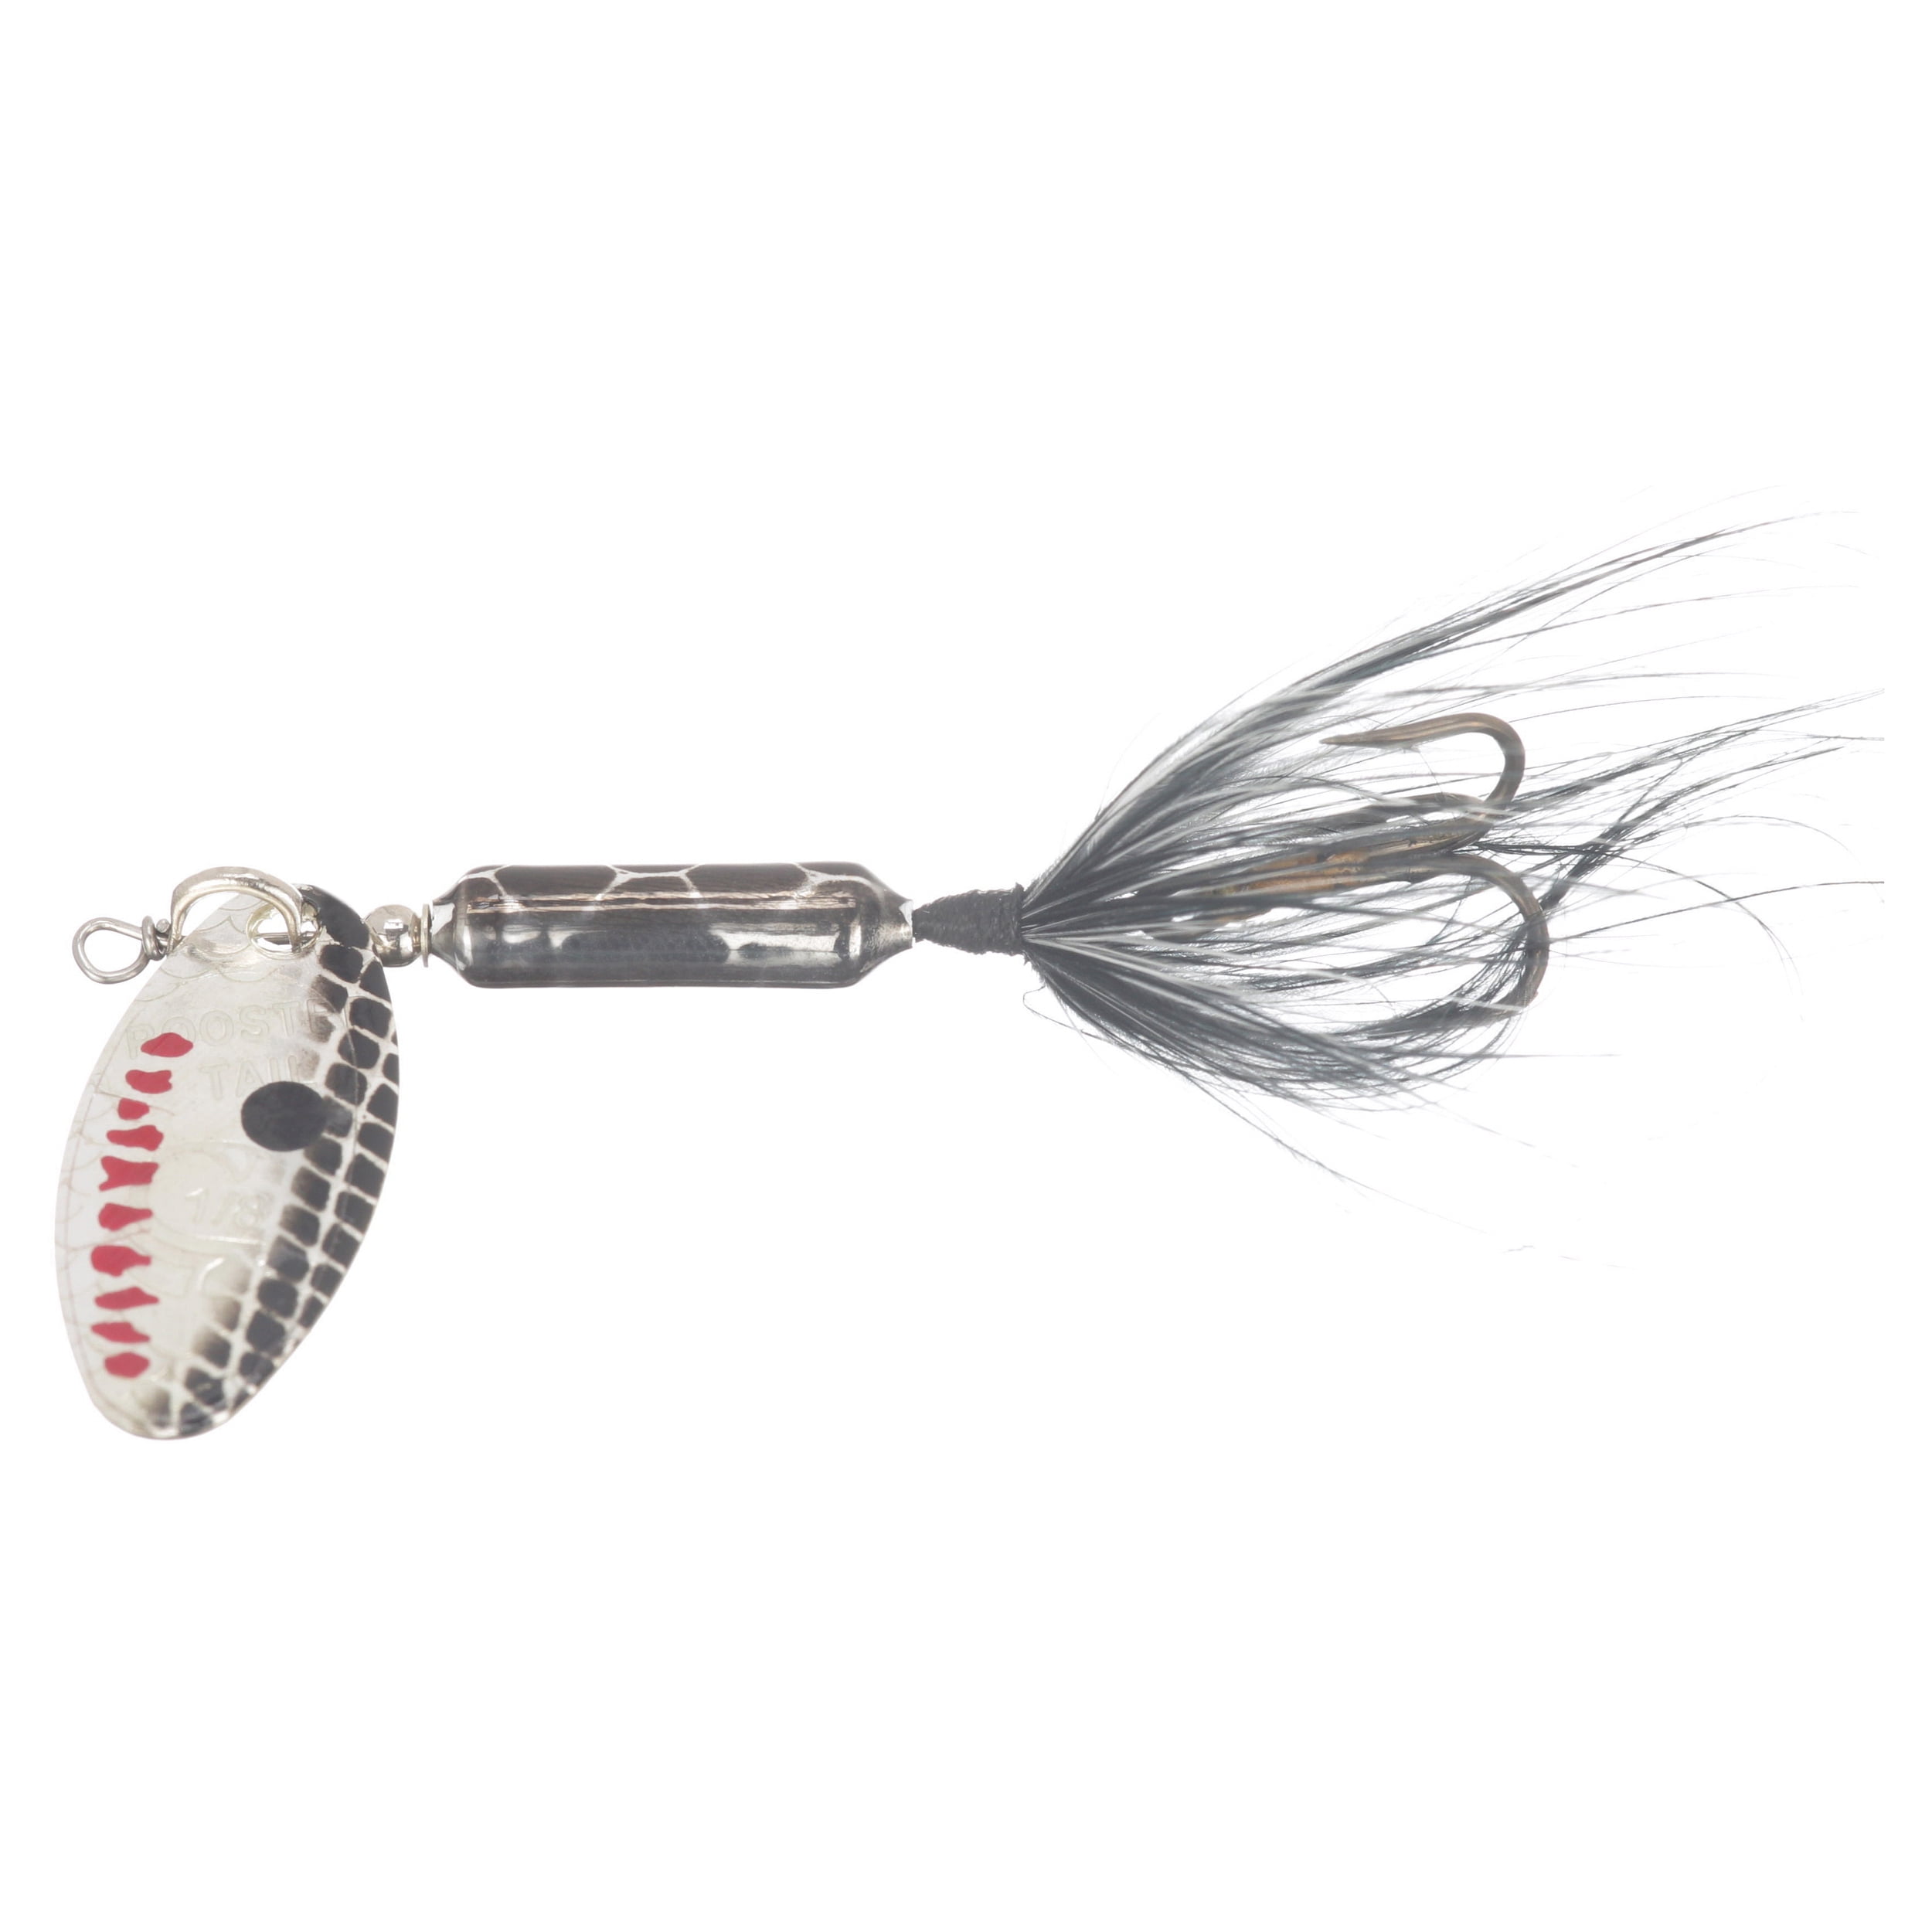 Worden's® Rooster Tail® Original Met Silver Black Lure, Inline Spinnerbait  Fishing Lure, 1/8 oz. Carded Pack 